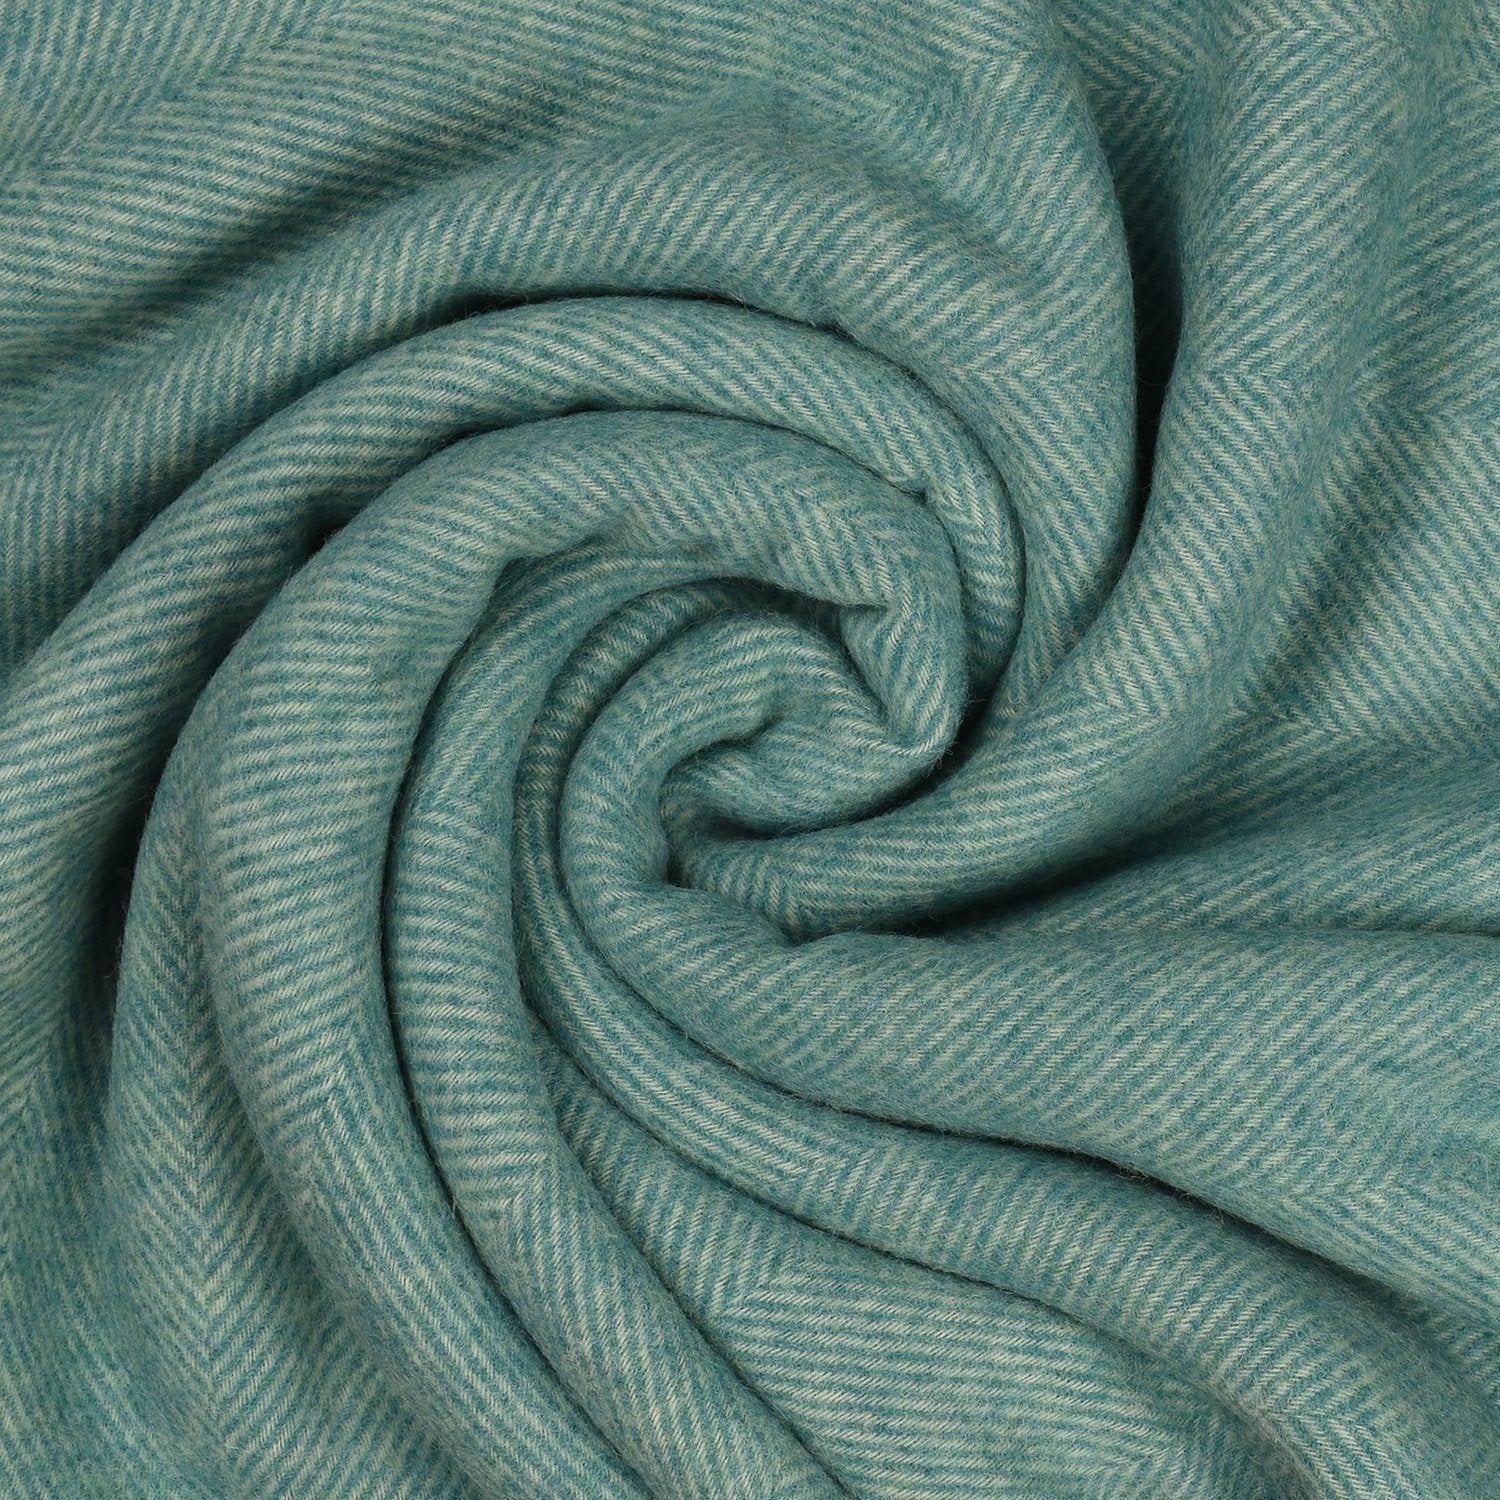 Southampton Home Wool Herringbone Throw (Sea Glass)-Throws and Blankets-Prince of Scots-810032750930-Q028001-12-Prince of Scots